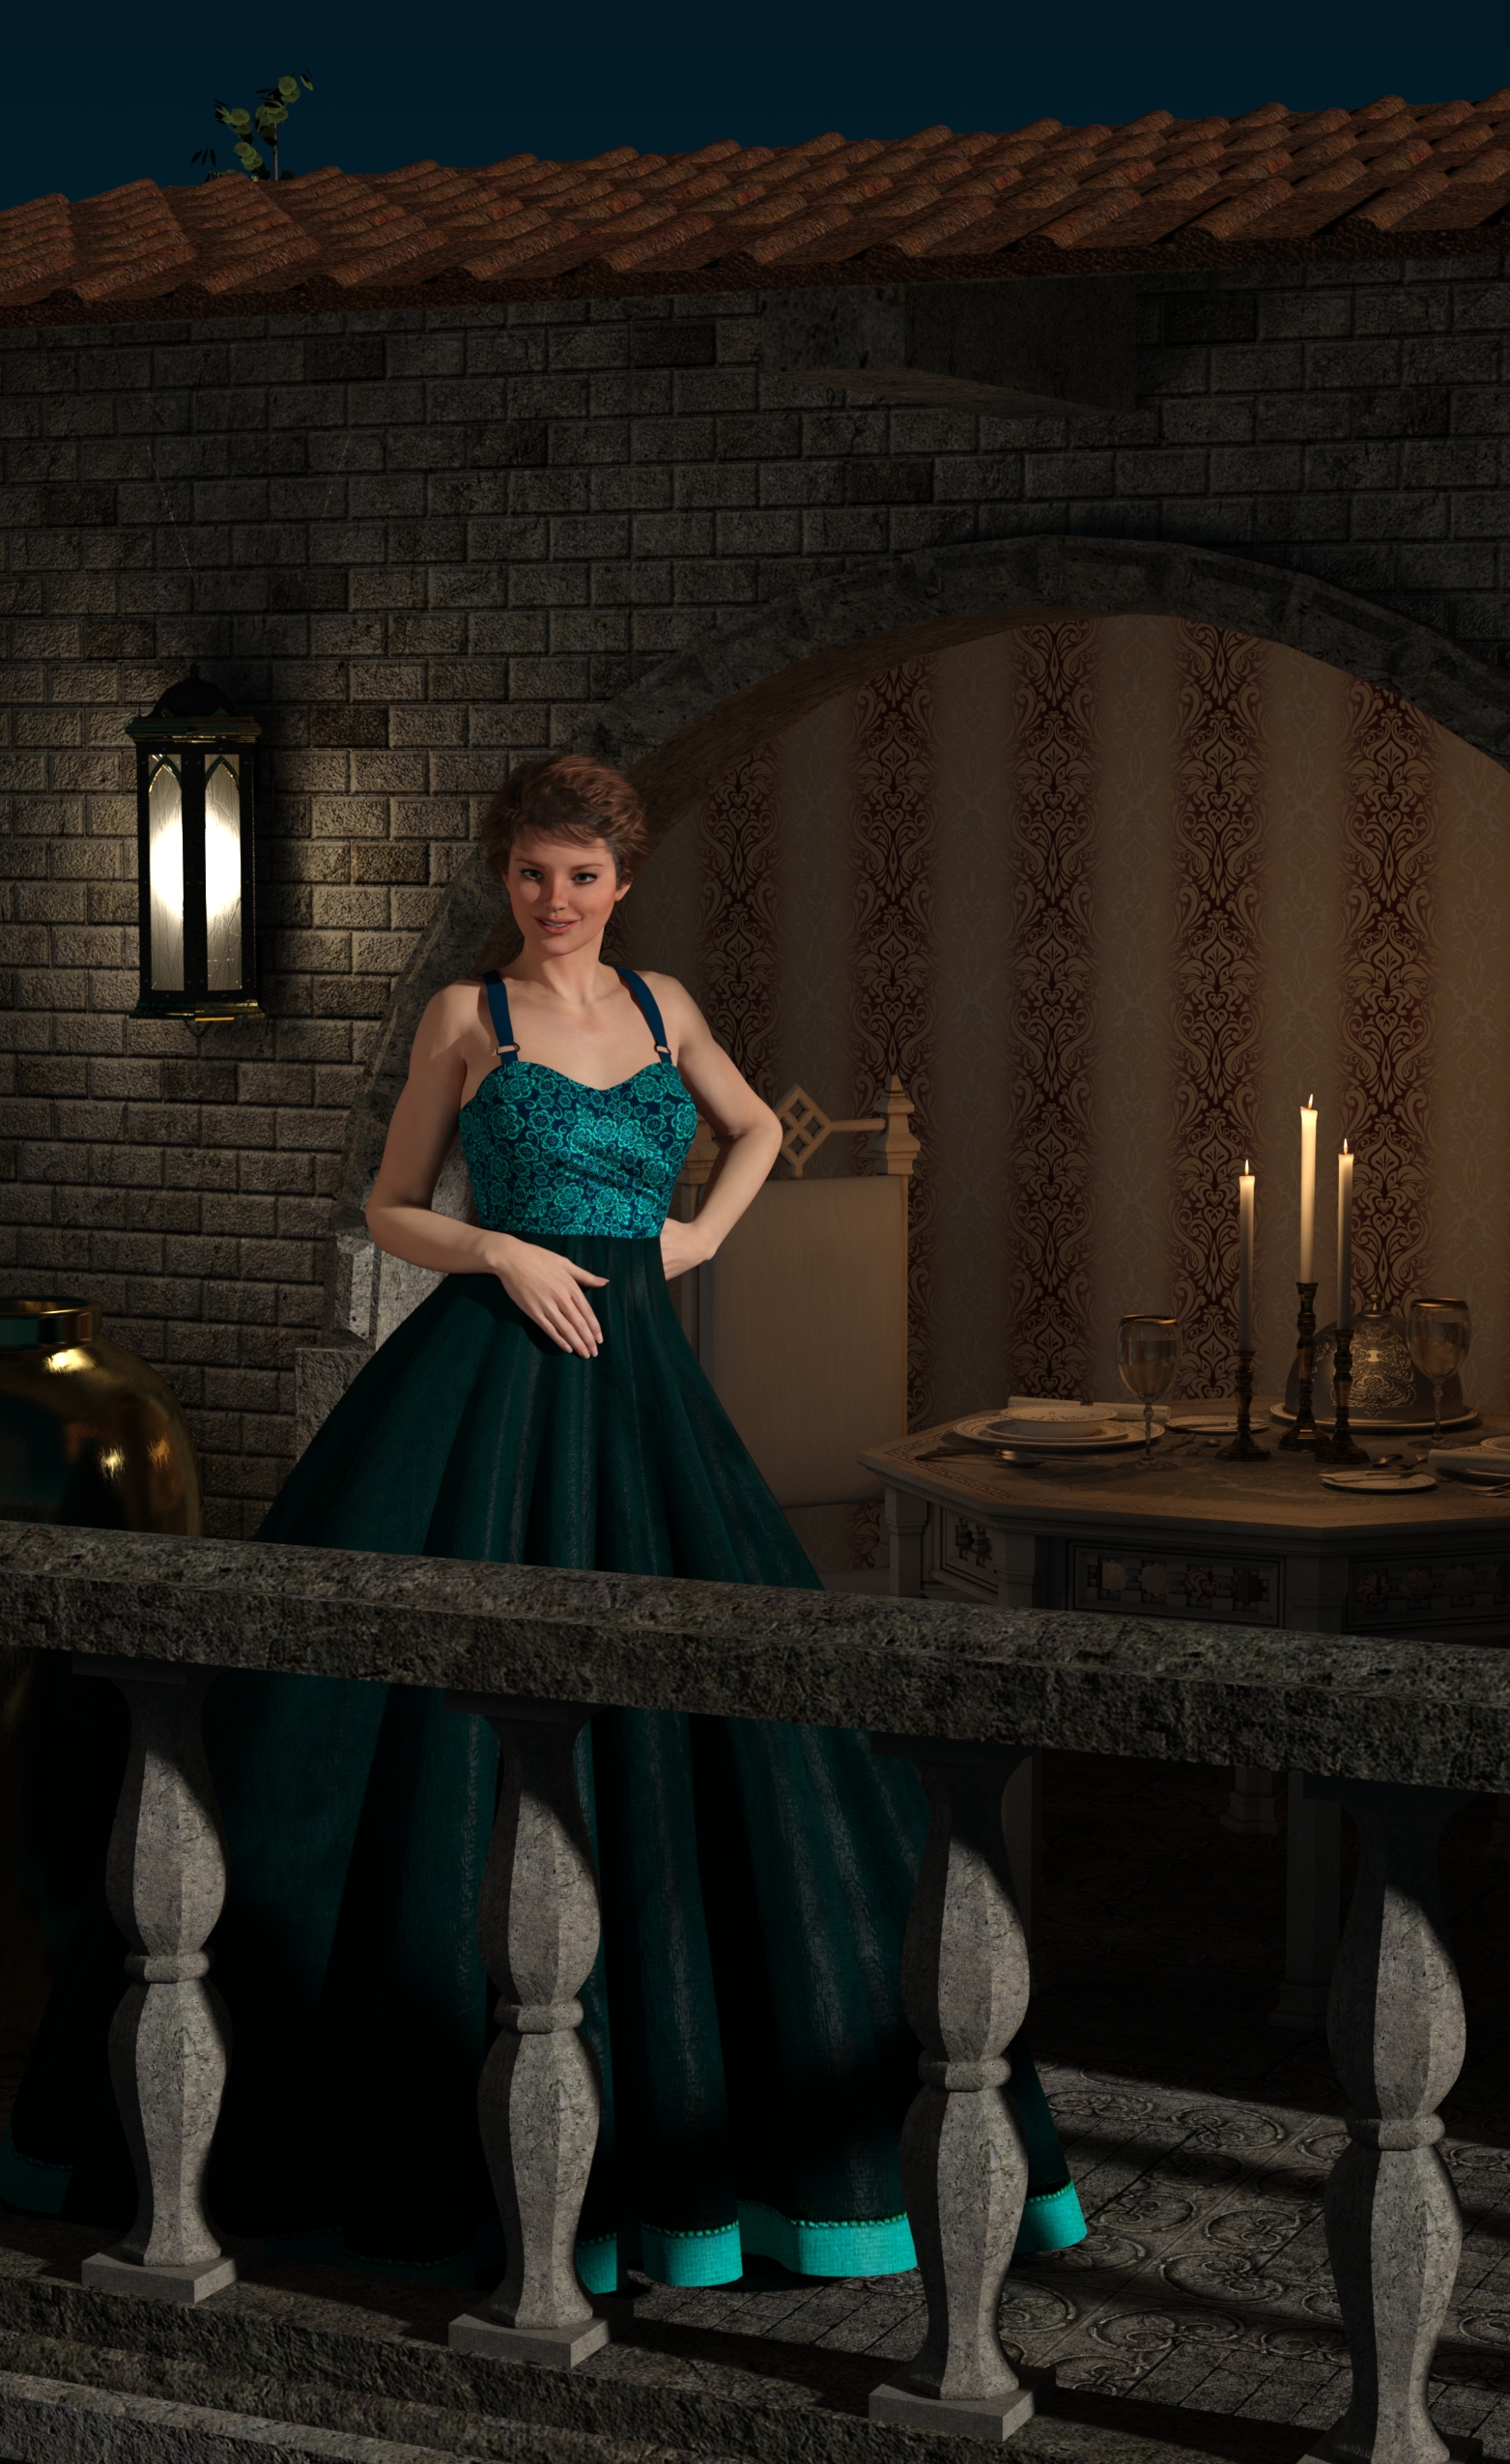 On The Balcony, (an Iray Makeover of a 2014 render,) by L'Adair